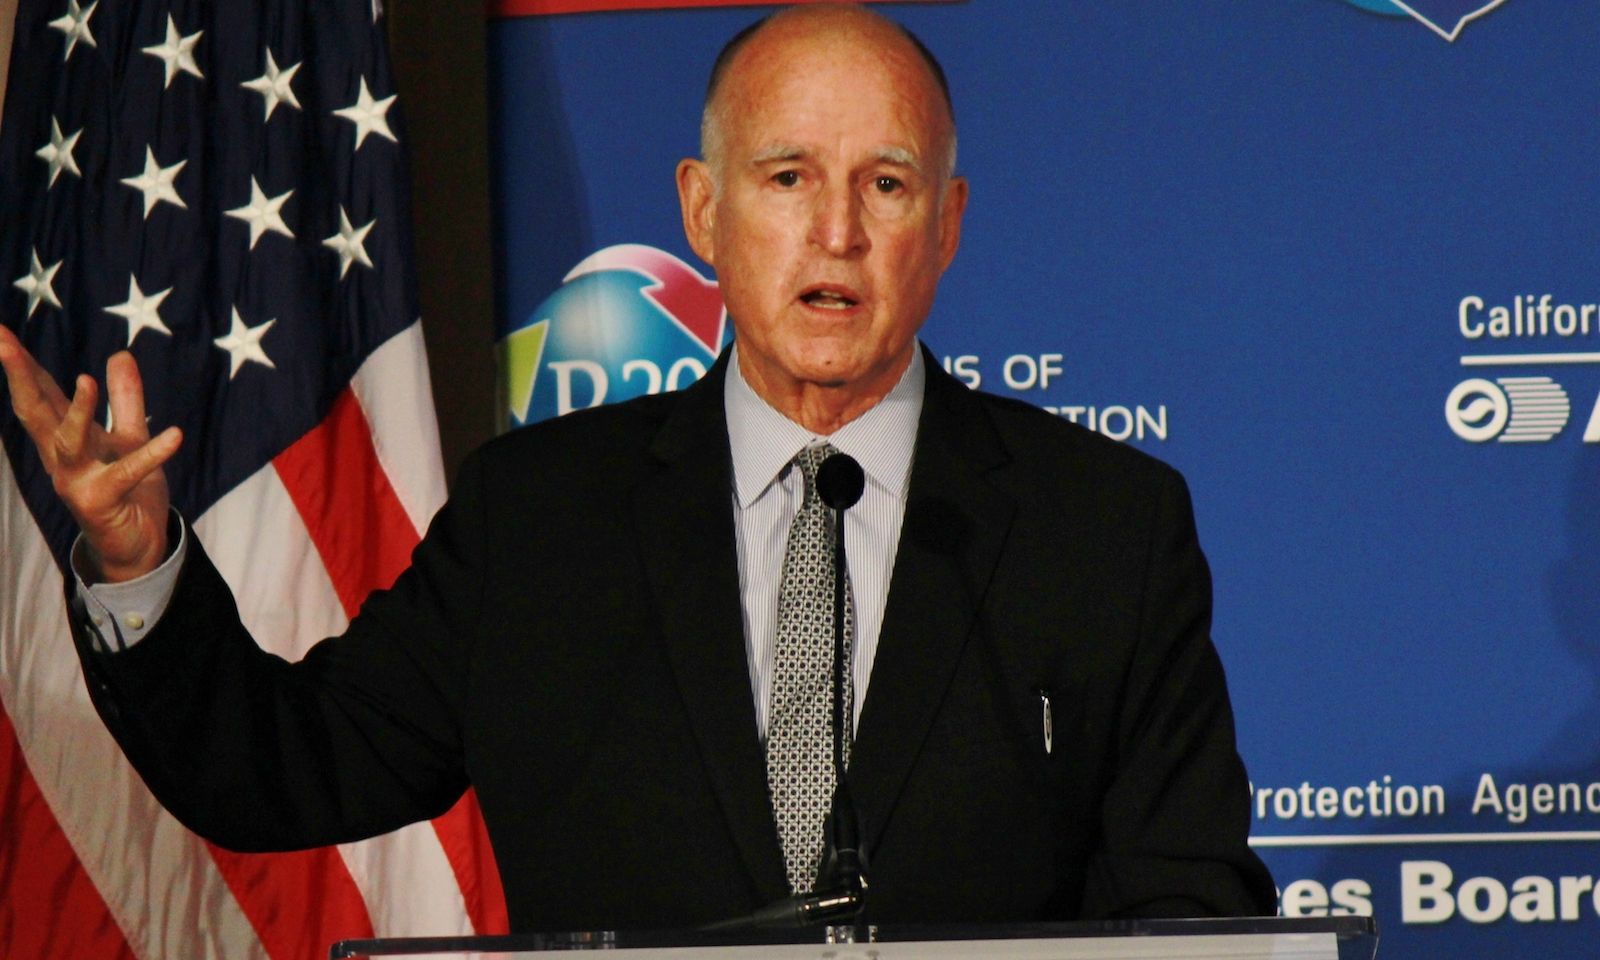 Online Privacy: CA Governor Jerry Brown Enacts ‘Milestone’ Law